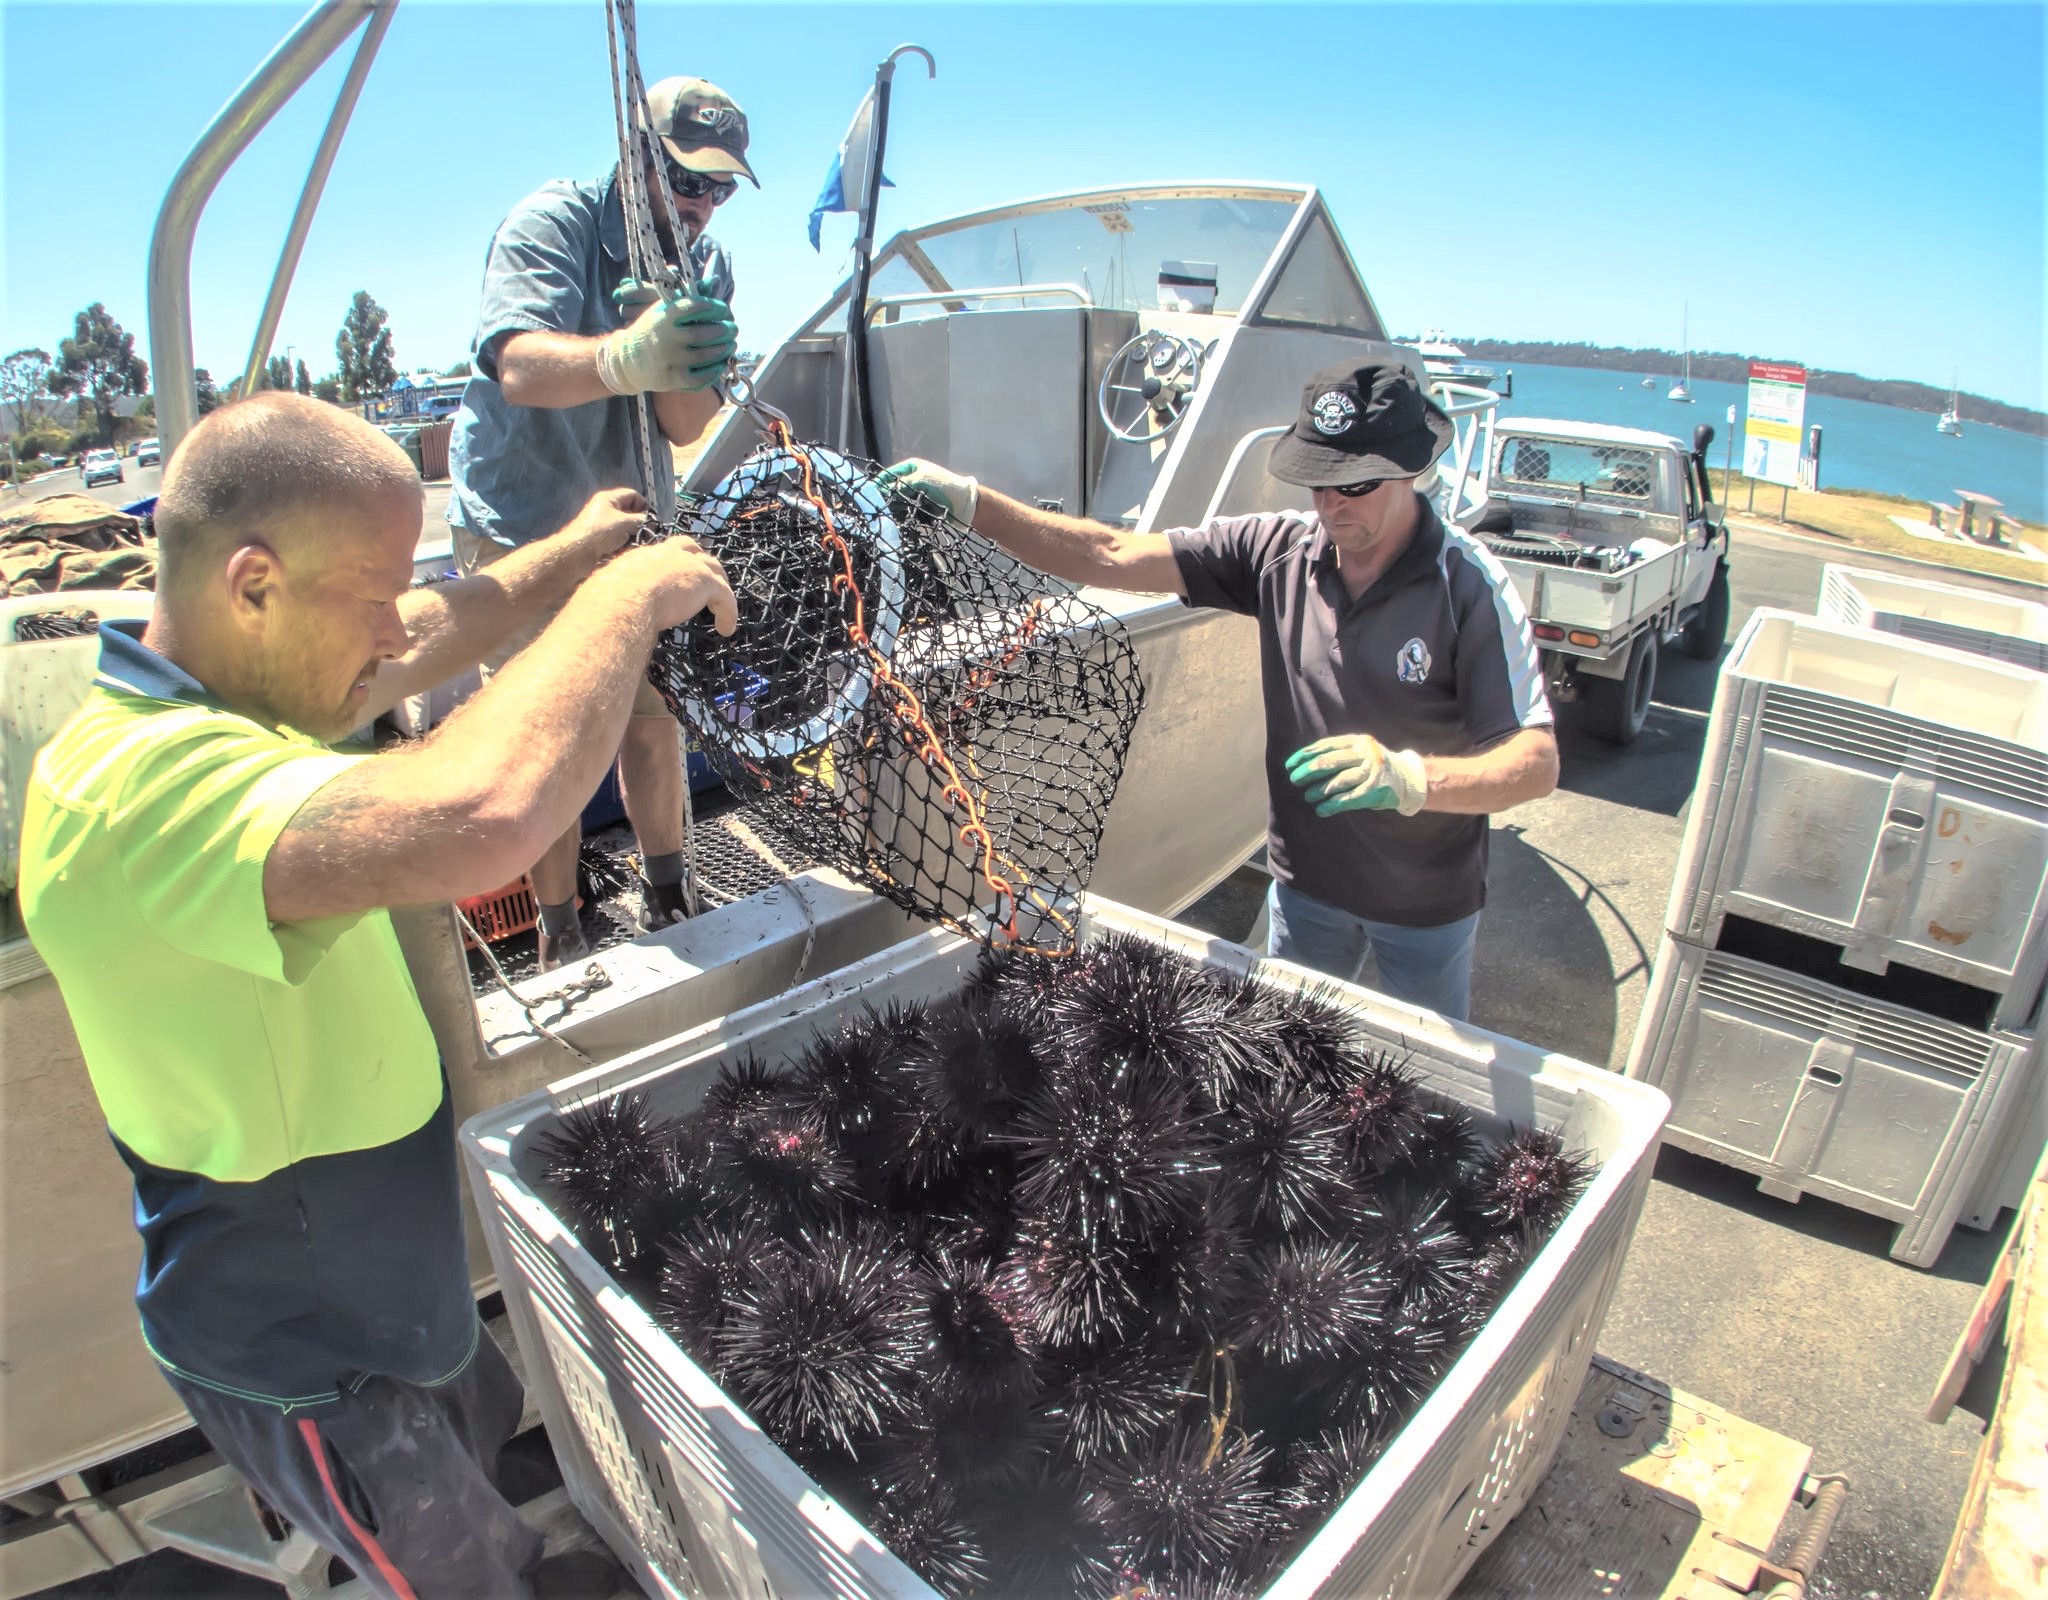 Three men carry a net over a cage full of sea urchins.